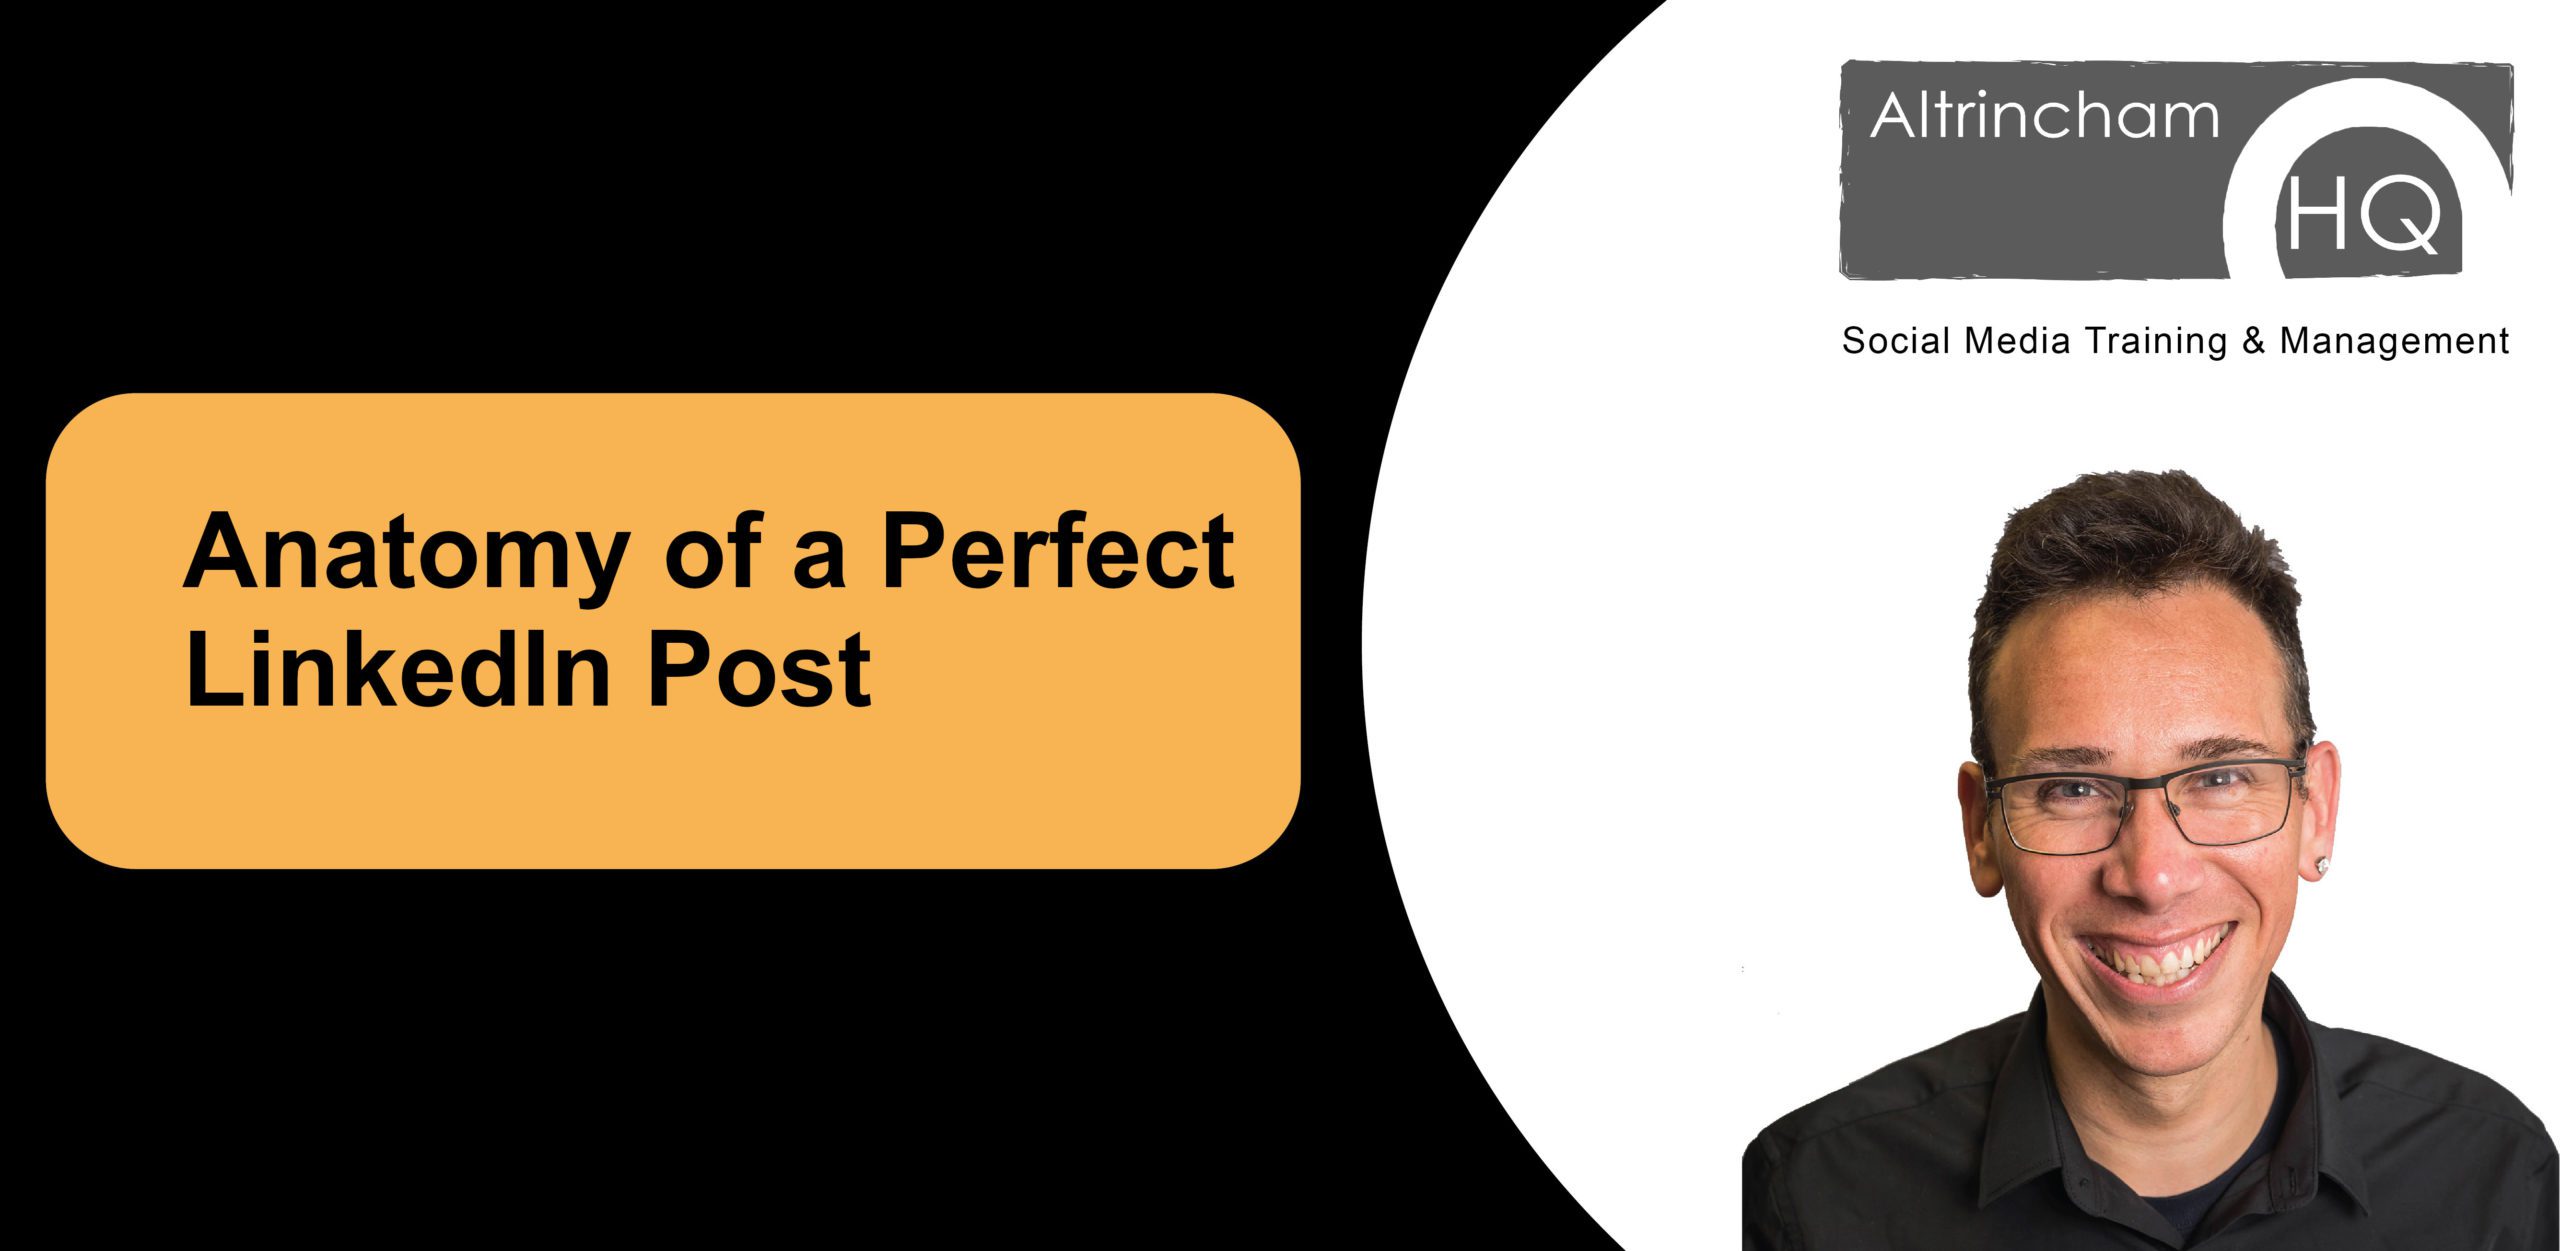 The Anatomy of a Perfect LinkedIn Post